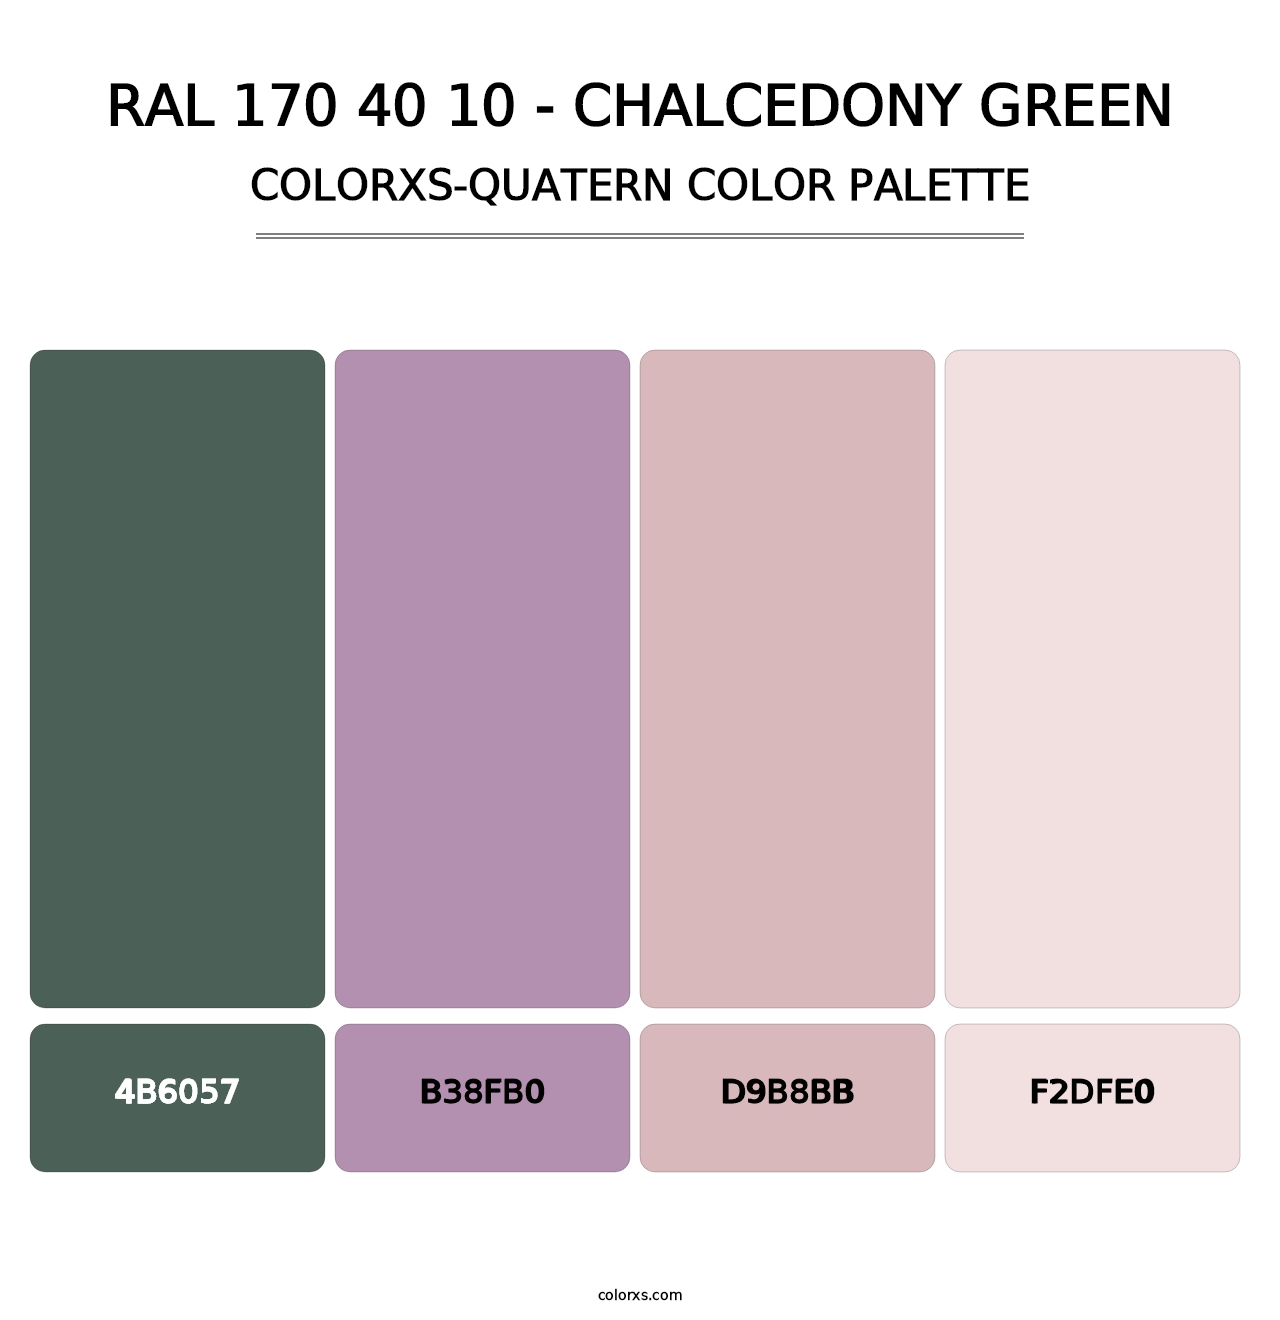 RAL 170 40 10 - Chalcedony Green - Colorxs Quatern Palette